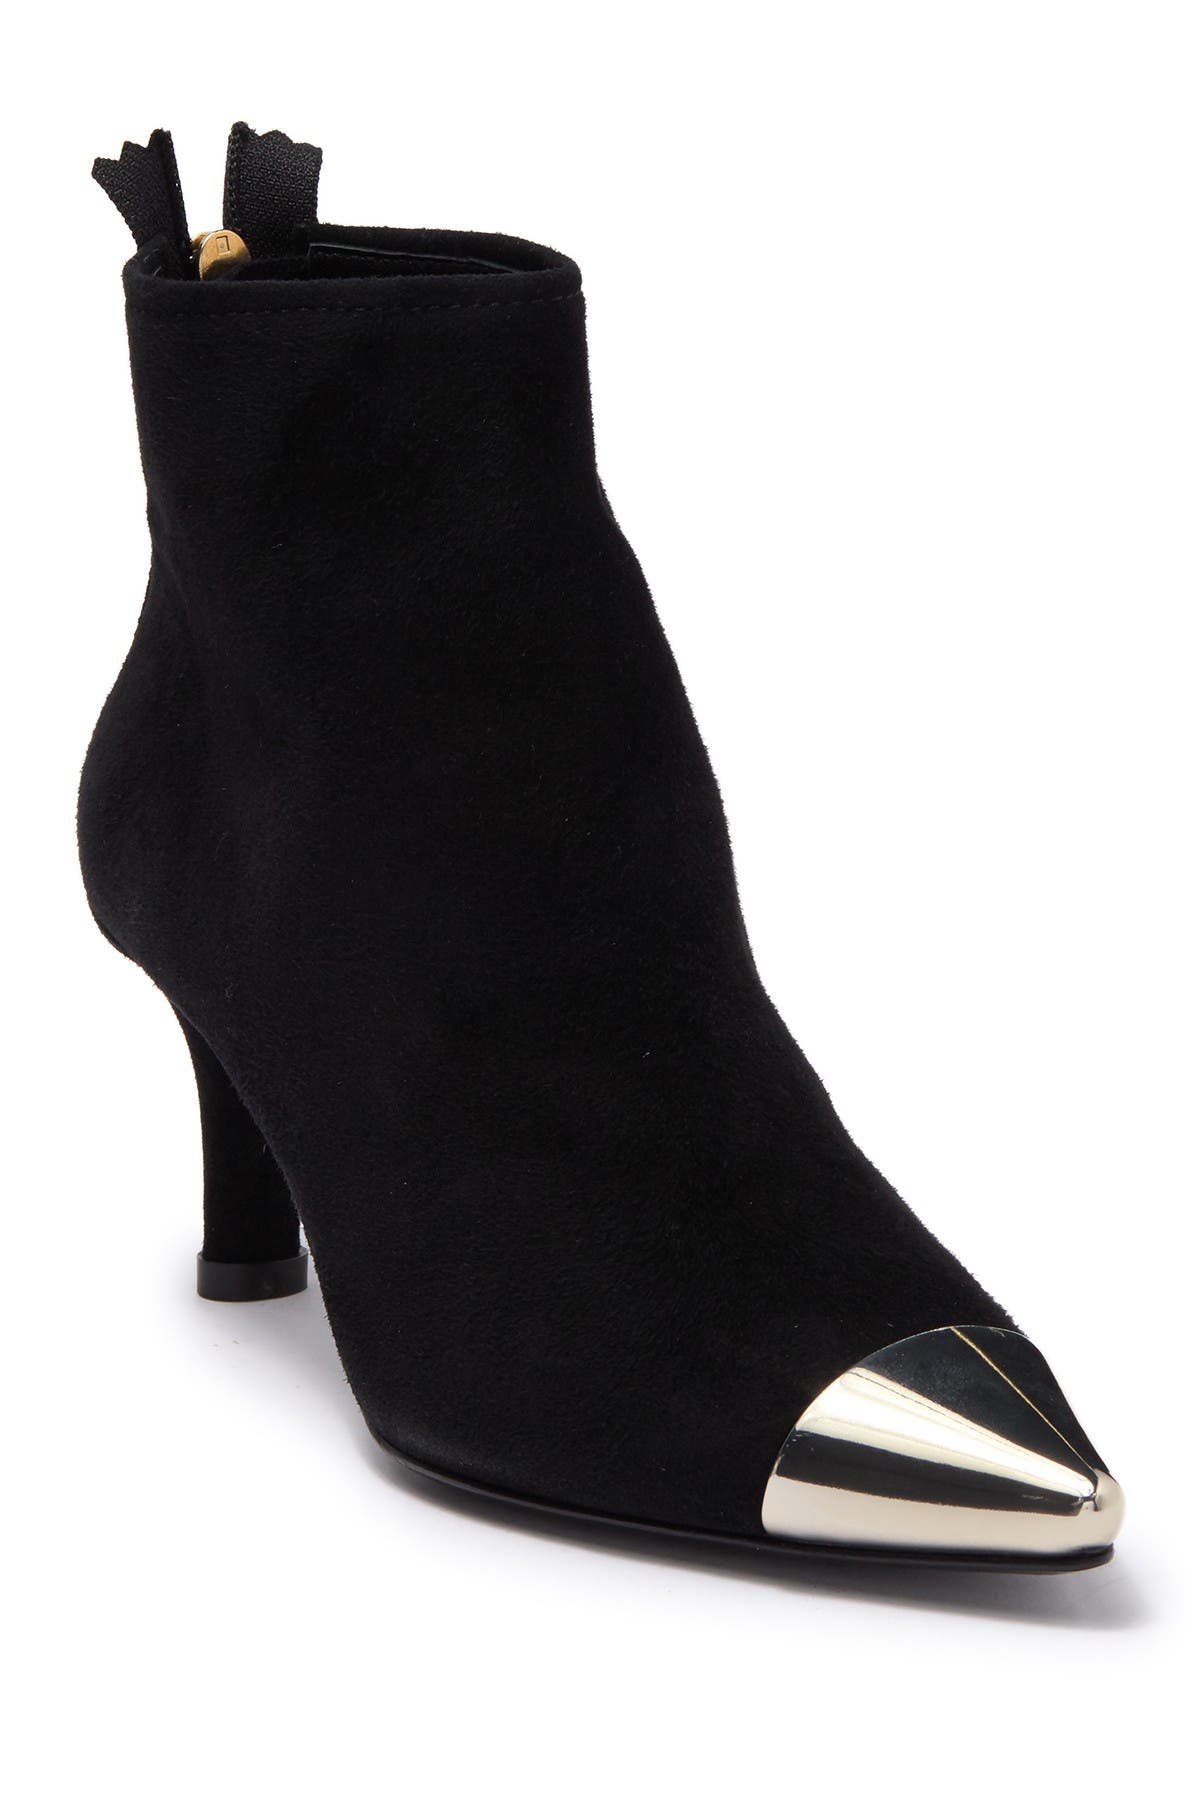 AGL | Suede Pointed Toe Bootie 